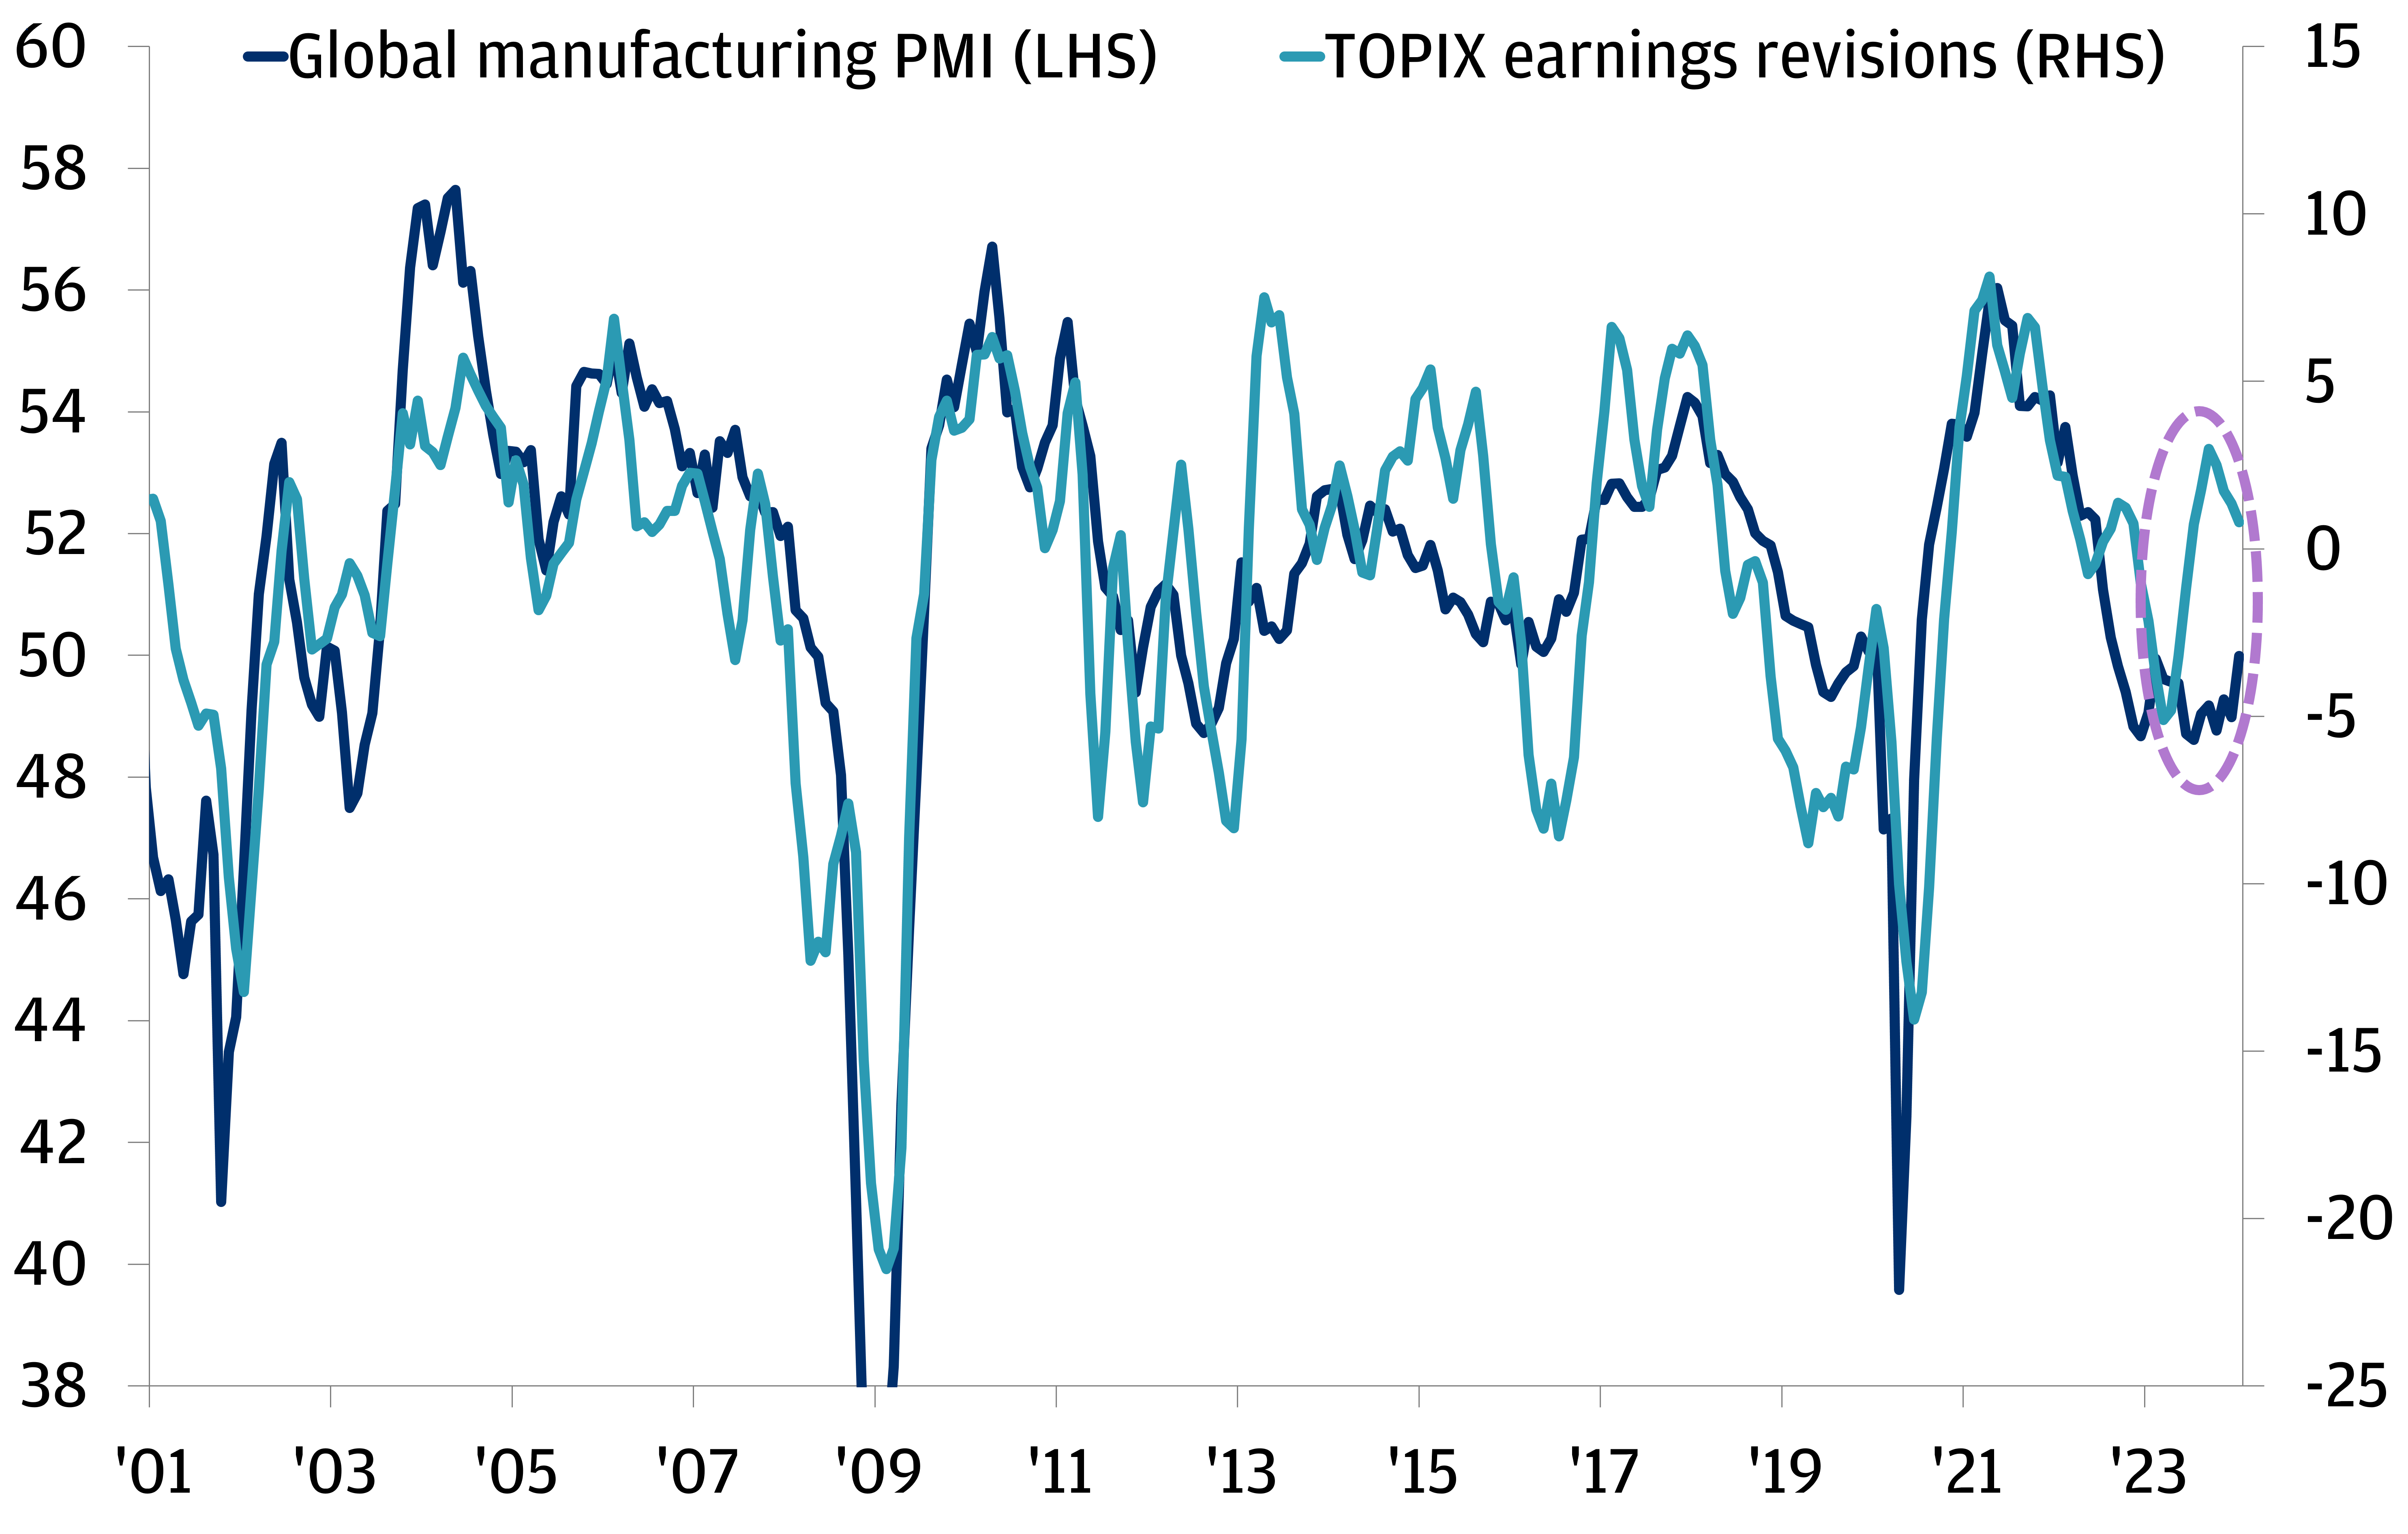 The line chart plots TOPIX earnings revisions (light blue line) and global manufacturing PMI (dark blue line) from 2001 to 2023. The global manufacturing PMI surveys the general sentiment, output and employment intentions of global manufacturers. A level above 50 indicates economic expansion, while a number below 50 indicates a contracting economy which is represented by the axis on the left-hand side. The axis on the right-hand side represents TOPIX earnings revisions.   Historically, there has been a strong correlation between TOPIX earnings and global manufacturing PMI where both indicators tend to move in tandem. This means that when global manufacturing activity increases, analysts tend to upgrade their earnings forecasts for Japanese companies. However, since February 2023, there has been a divergence between the TOPIX earnings revisions and global manufacturing PMI. Global manufacturing PMI has decreased from 49.9 in Feb-23 to 48.8 in Oct-23 but TOPIX earnings revision increased significantly from -3.8 in Feb-23 to 2.5 in Oct-23. 